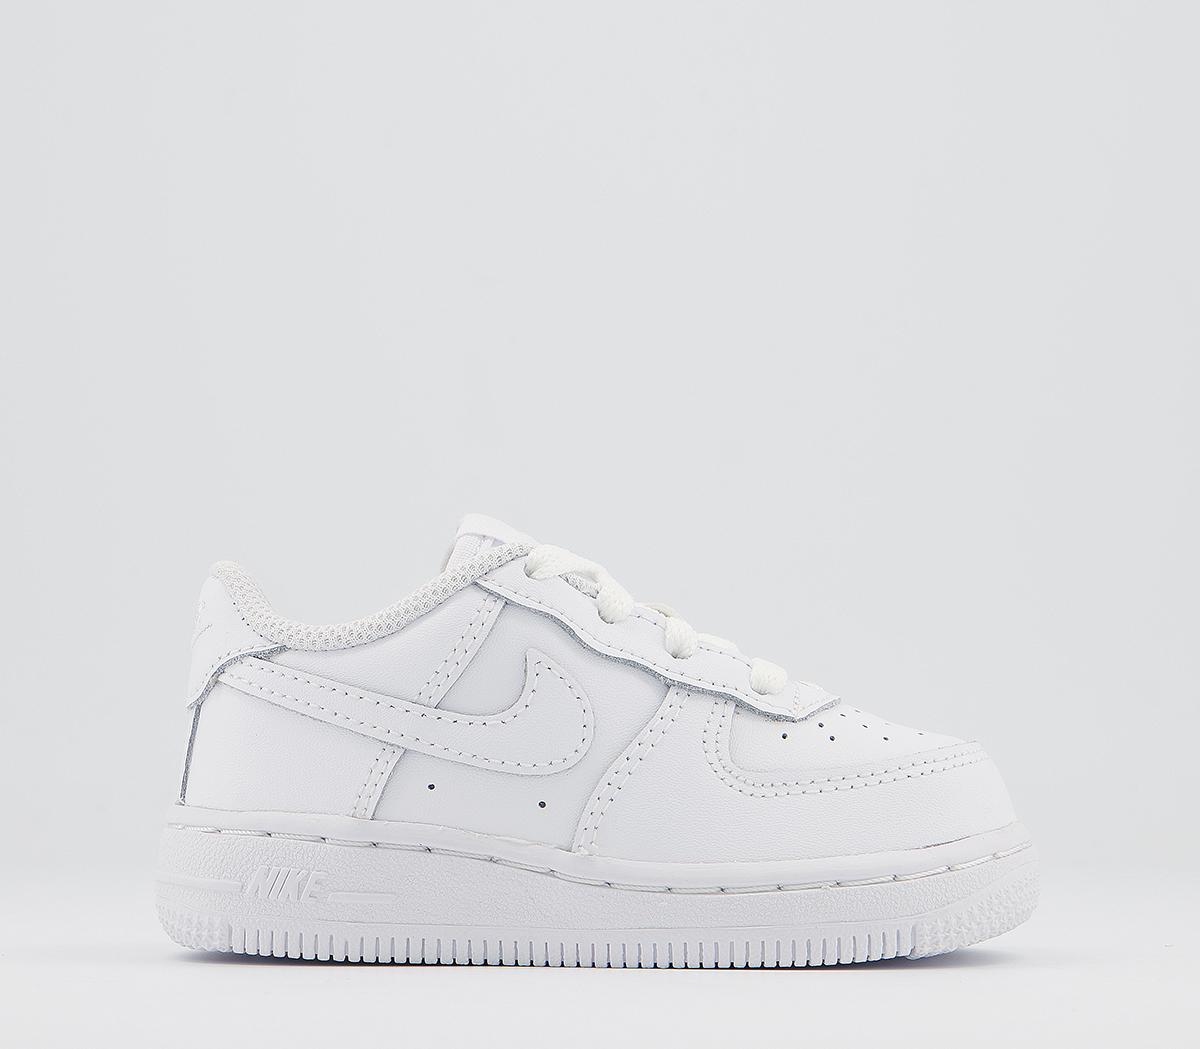 white air forces baby